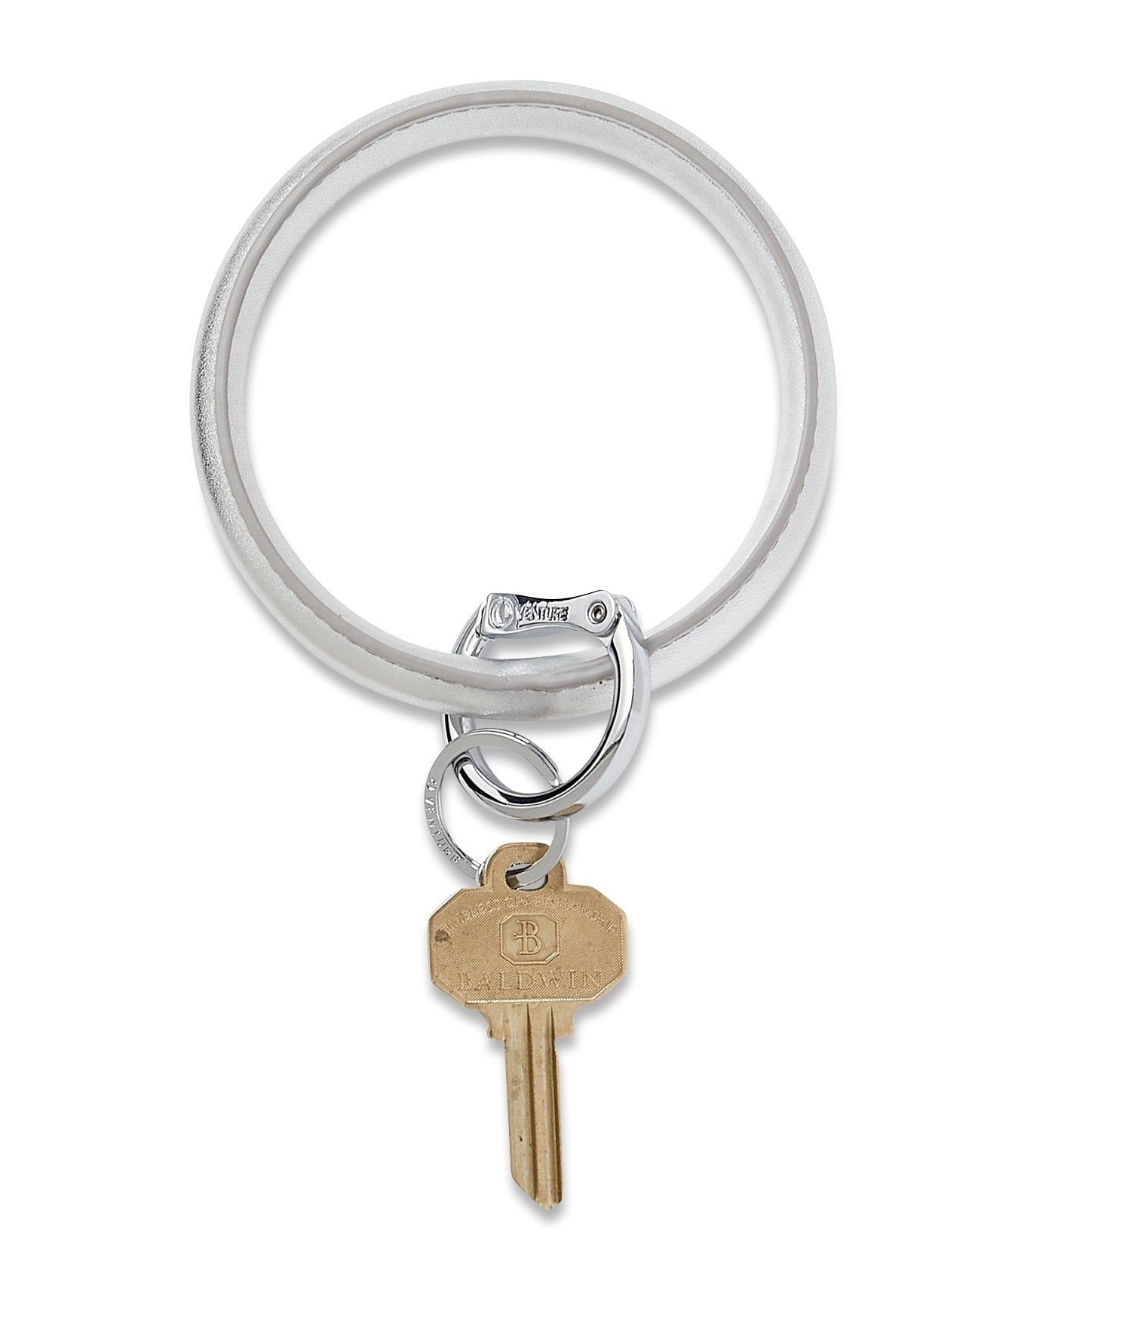 O Venture Signature Leather Key Ring Collection